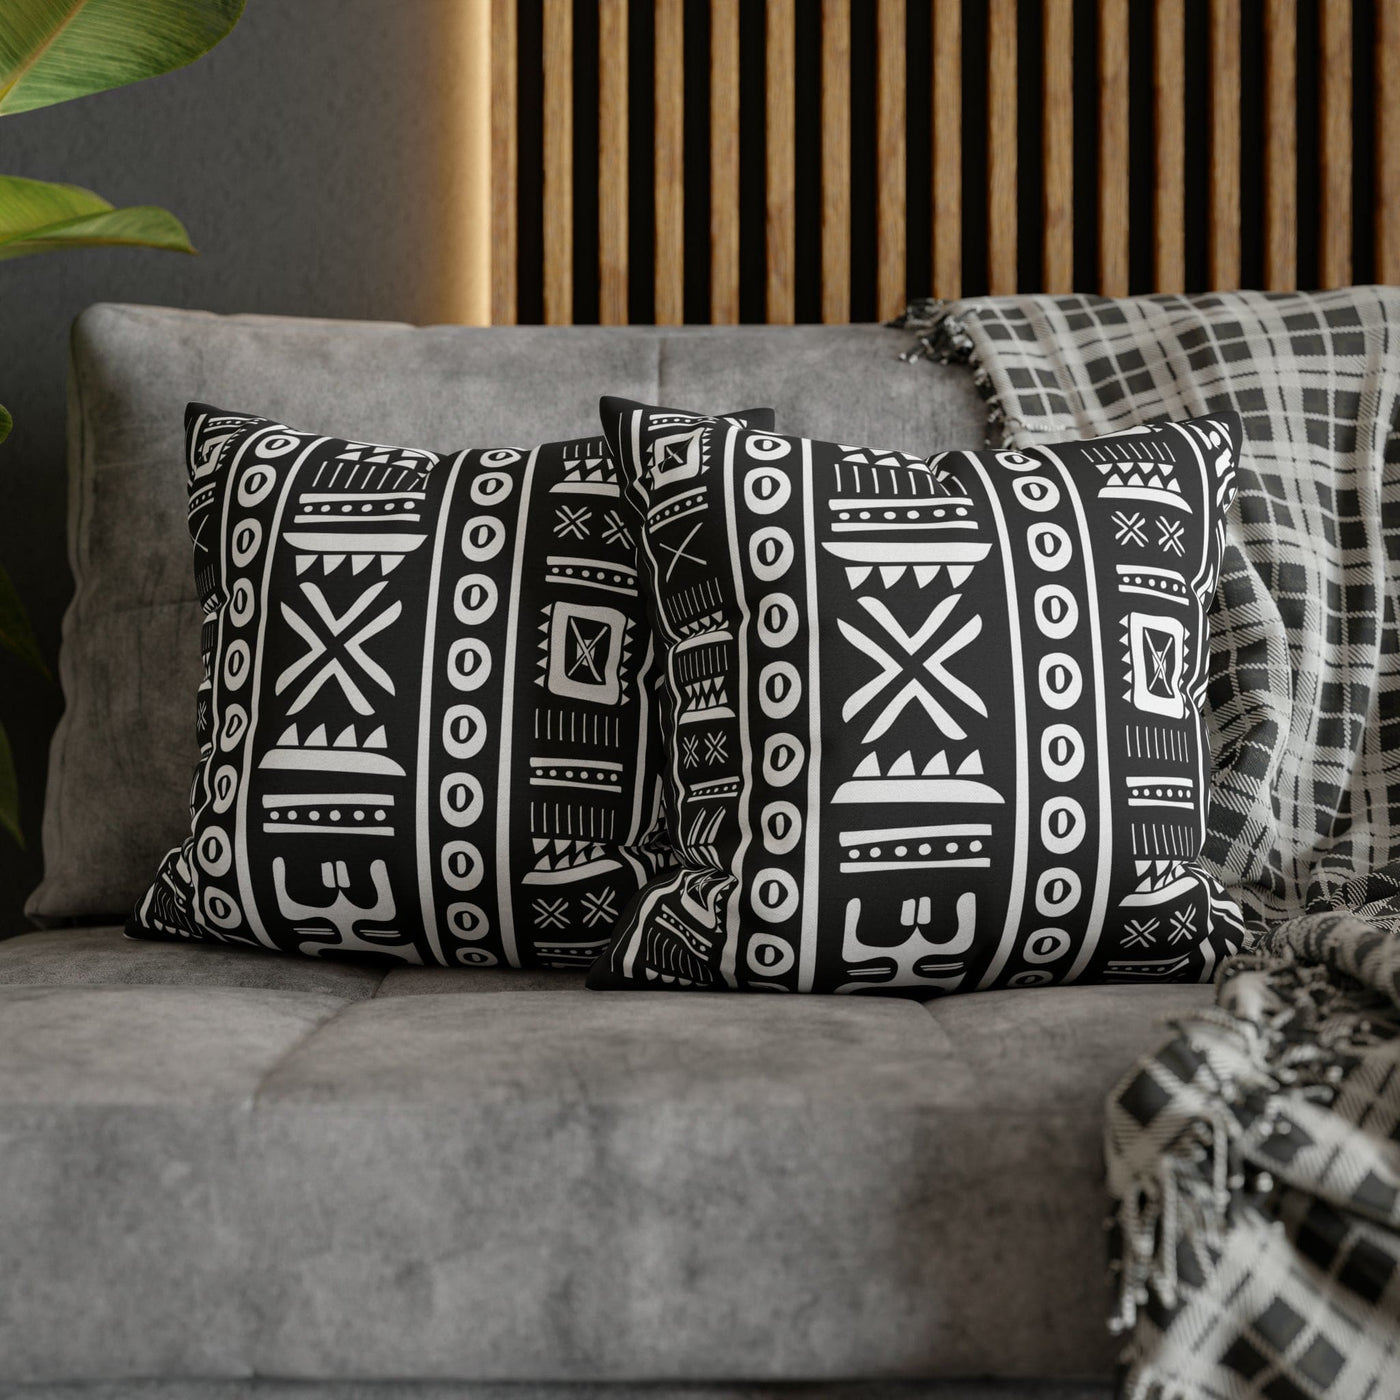 Decorative Throw Pillow Covers With Zipper - Set Of 2 Black And White Tribal